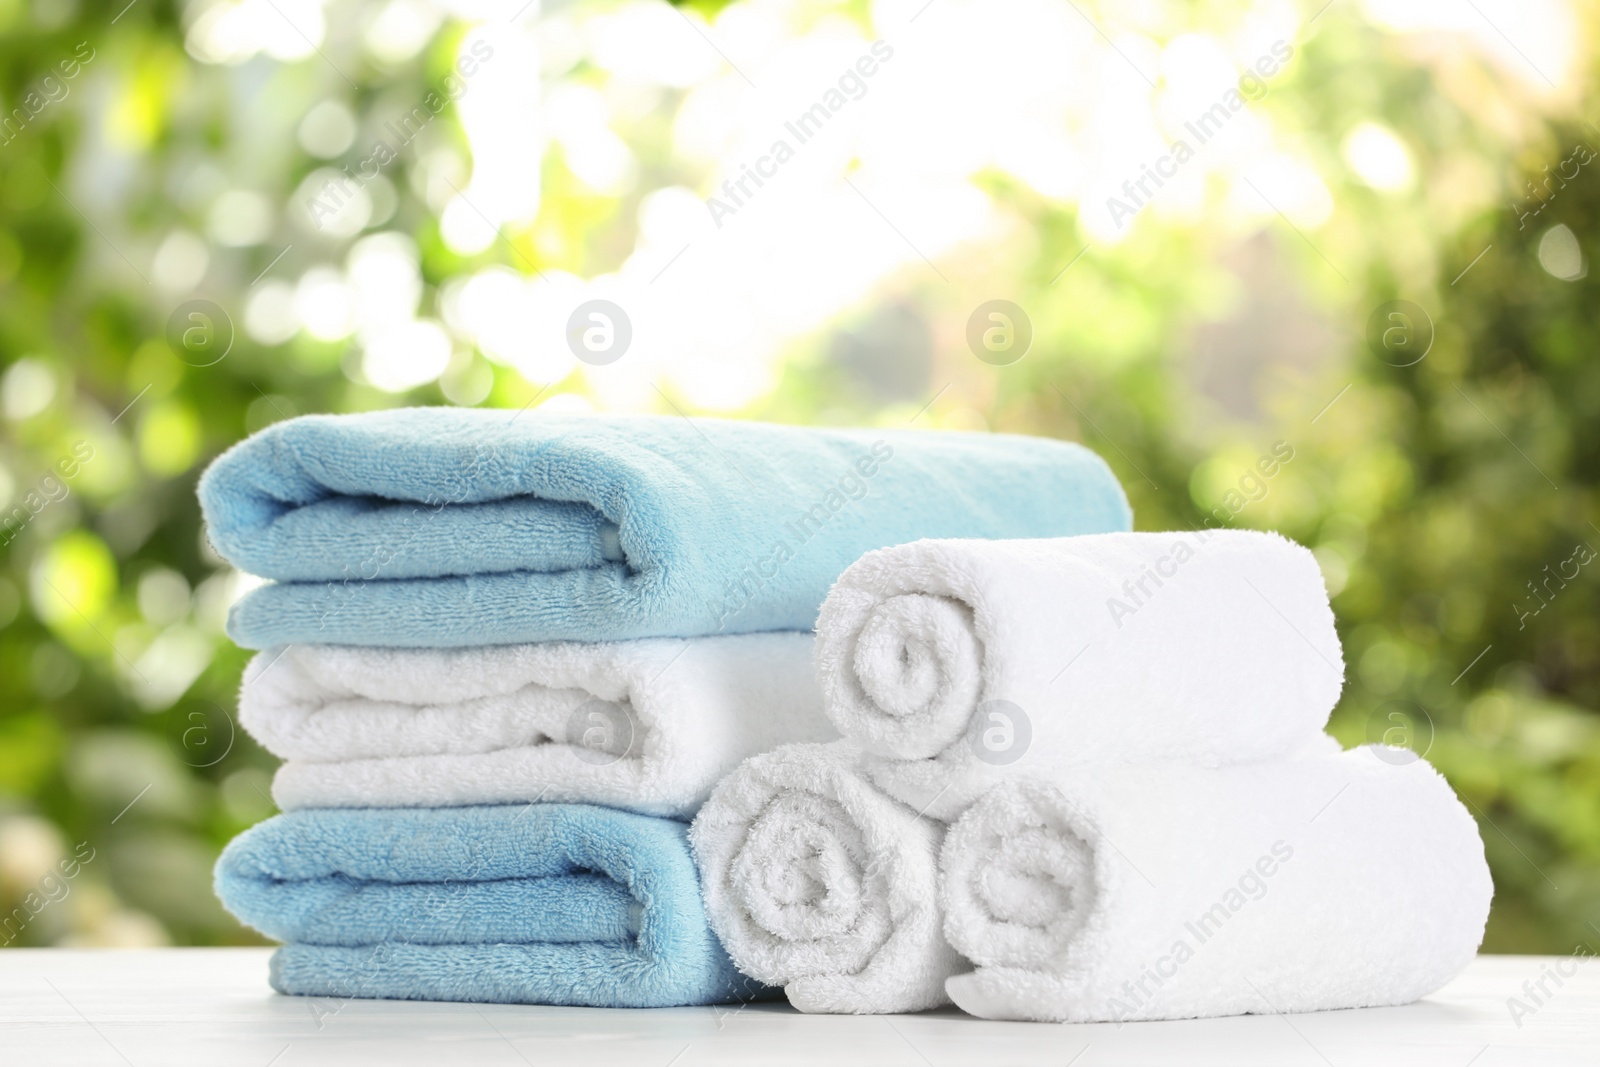 Photo of Soft bath towels on table against blurred background